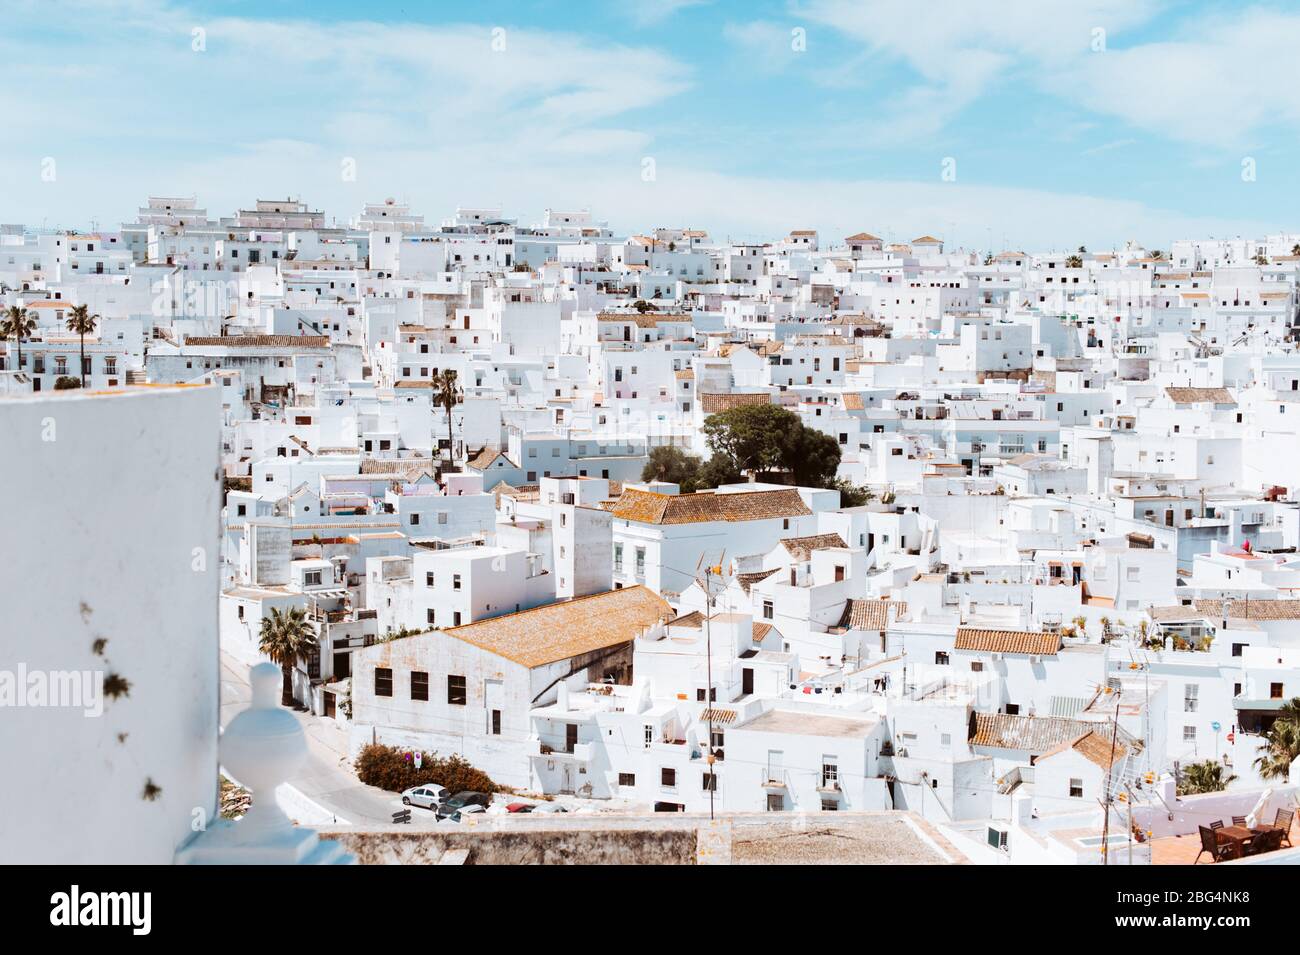 Village of white houses against blue sky in Southern Spain Stock Photo